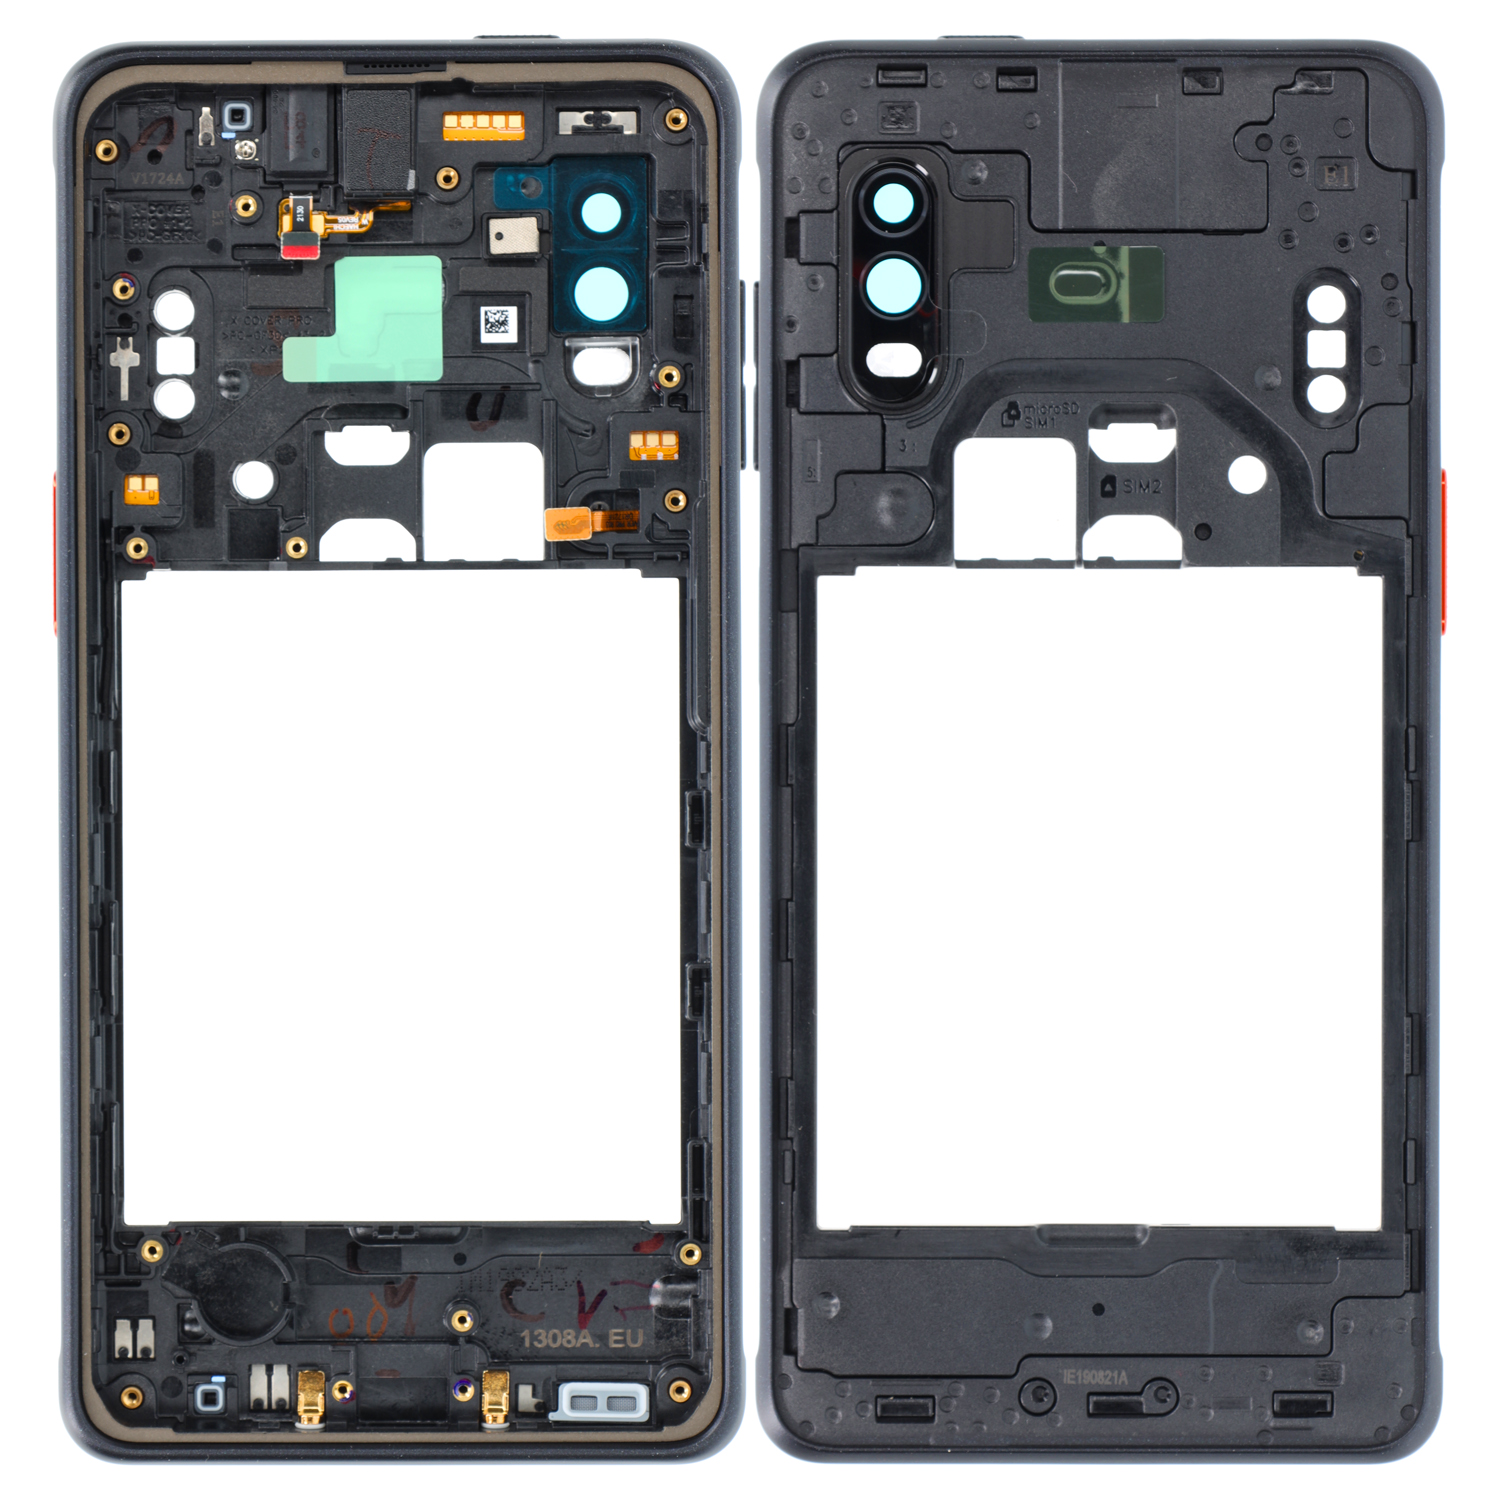 Samsung Galaxy Xcover Pro G715 Middle Frame Sevicepack